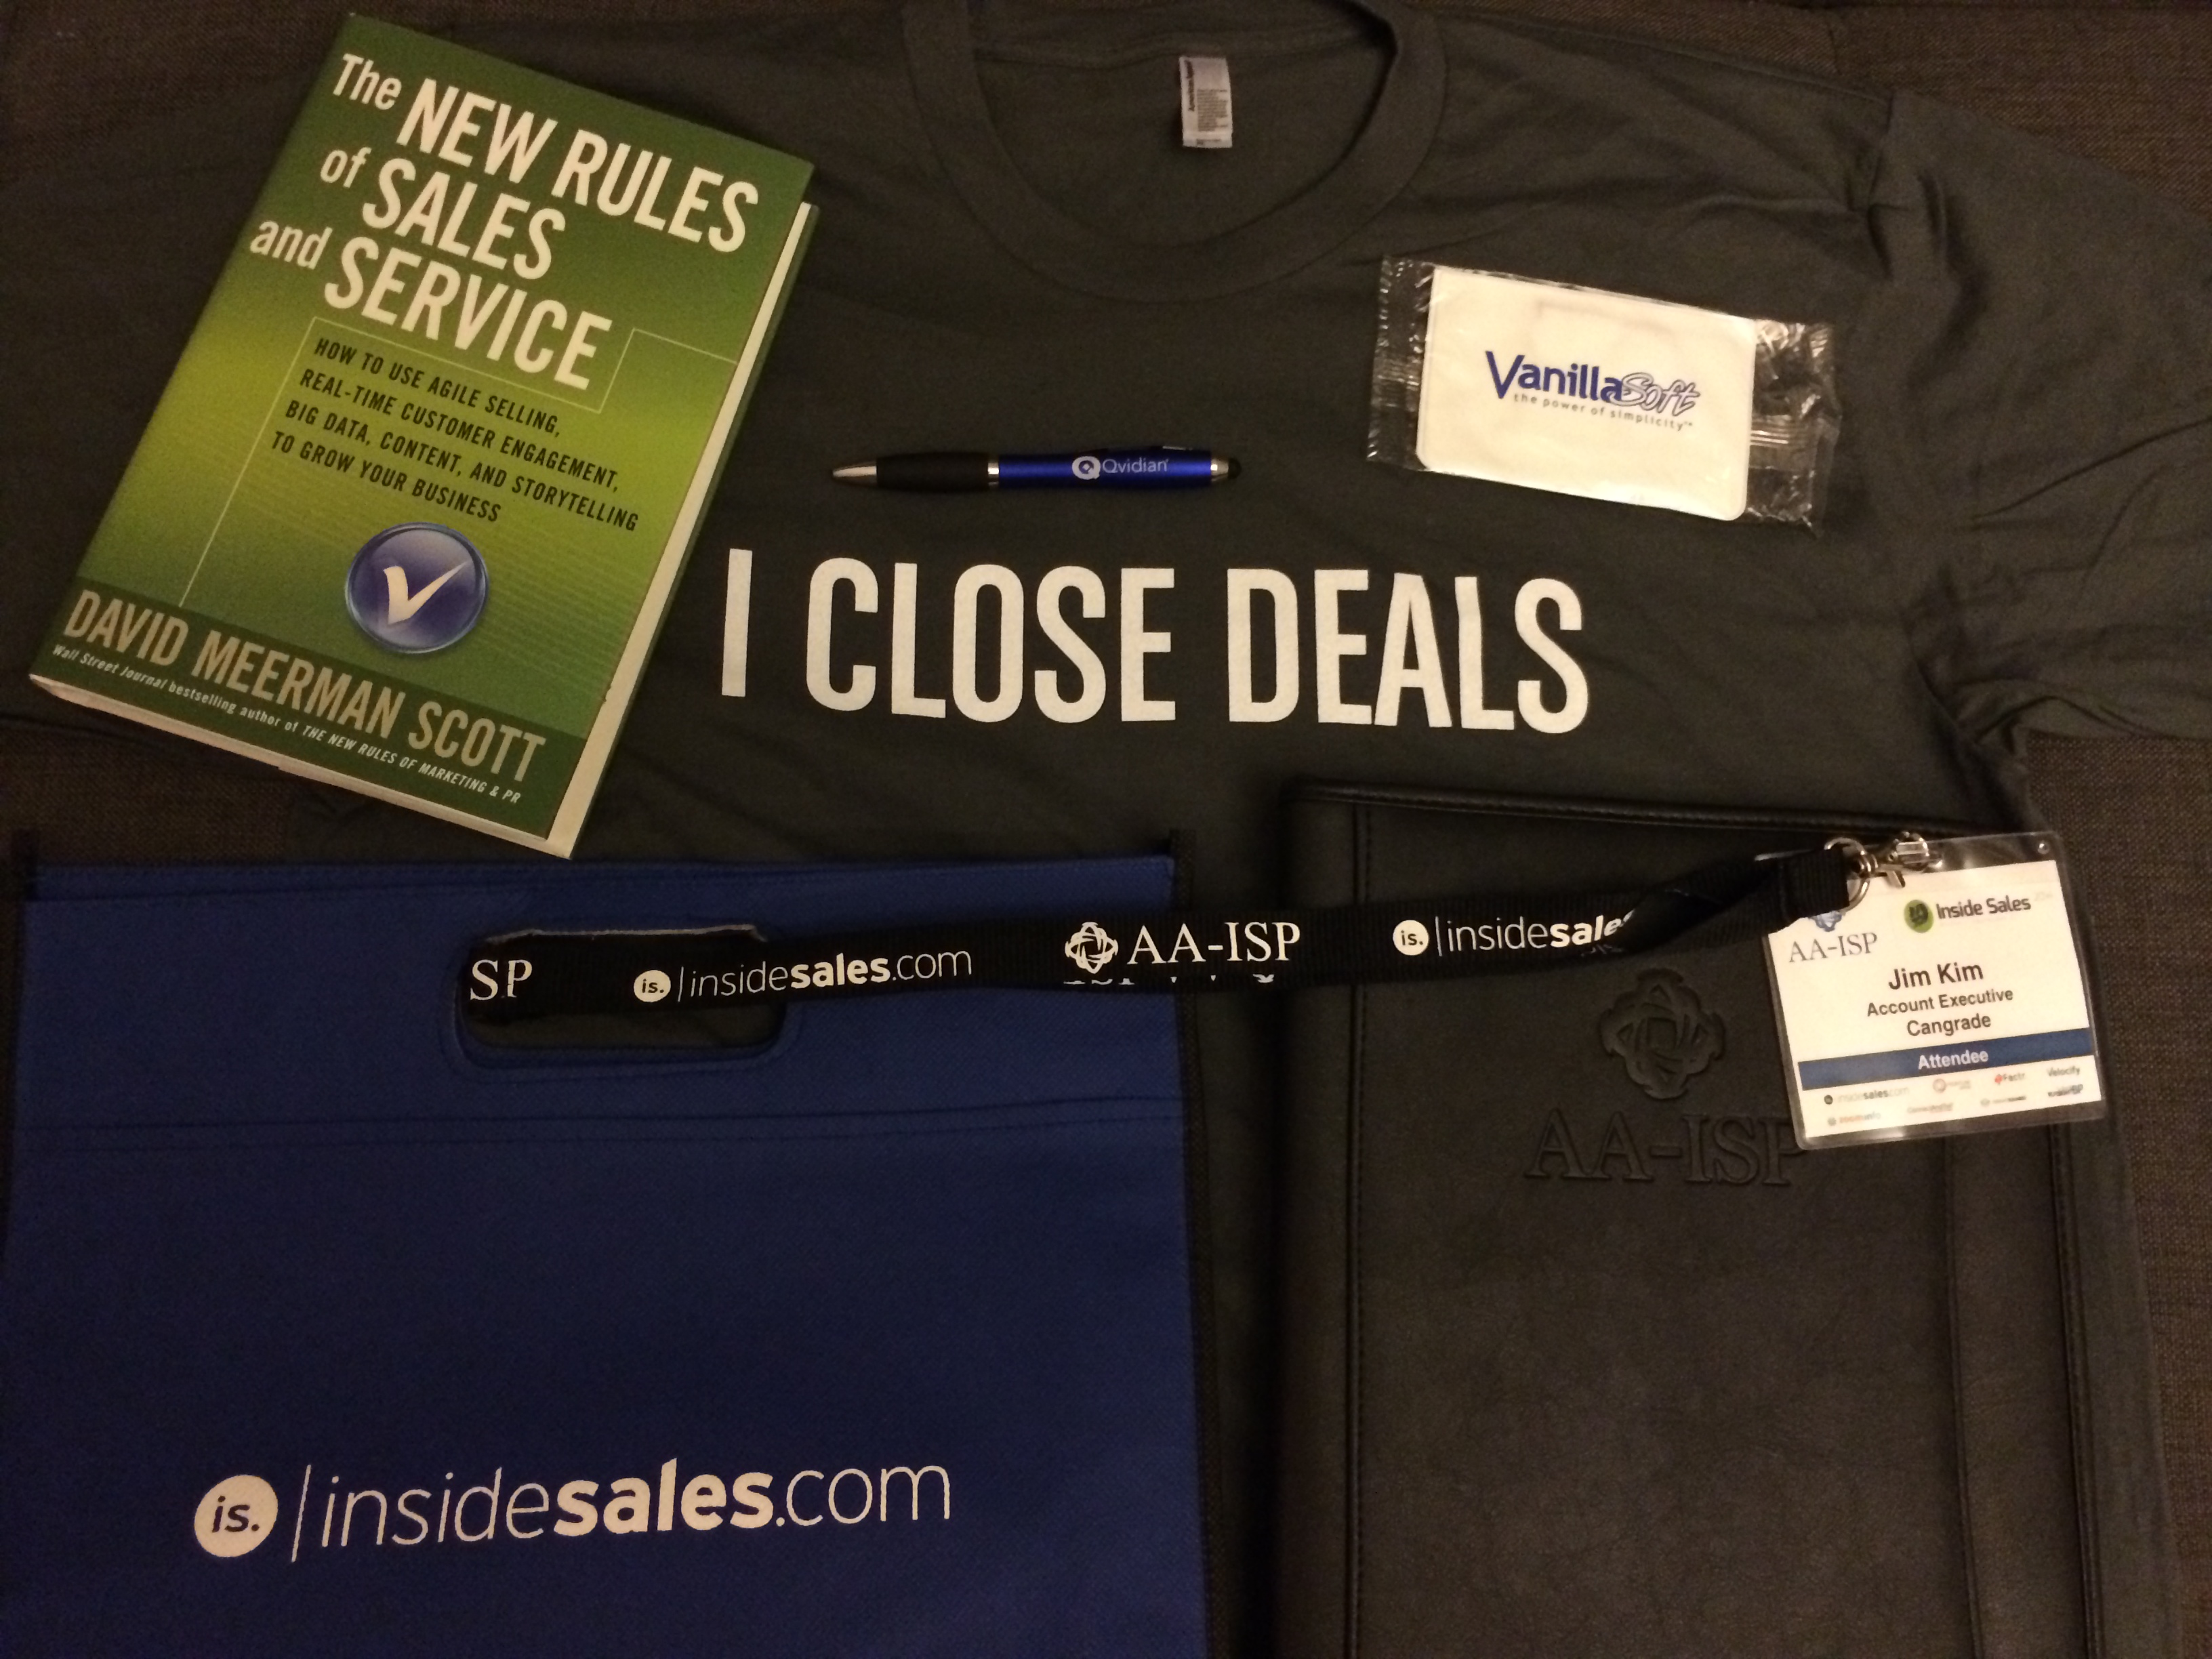 Some of the S.W.A.G. (Stuff We All Get) collected from the AA-ISP Inside Sales 2014 Boston conference.